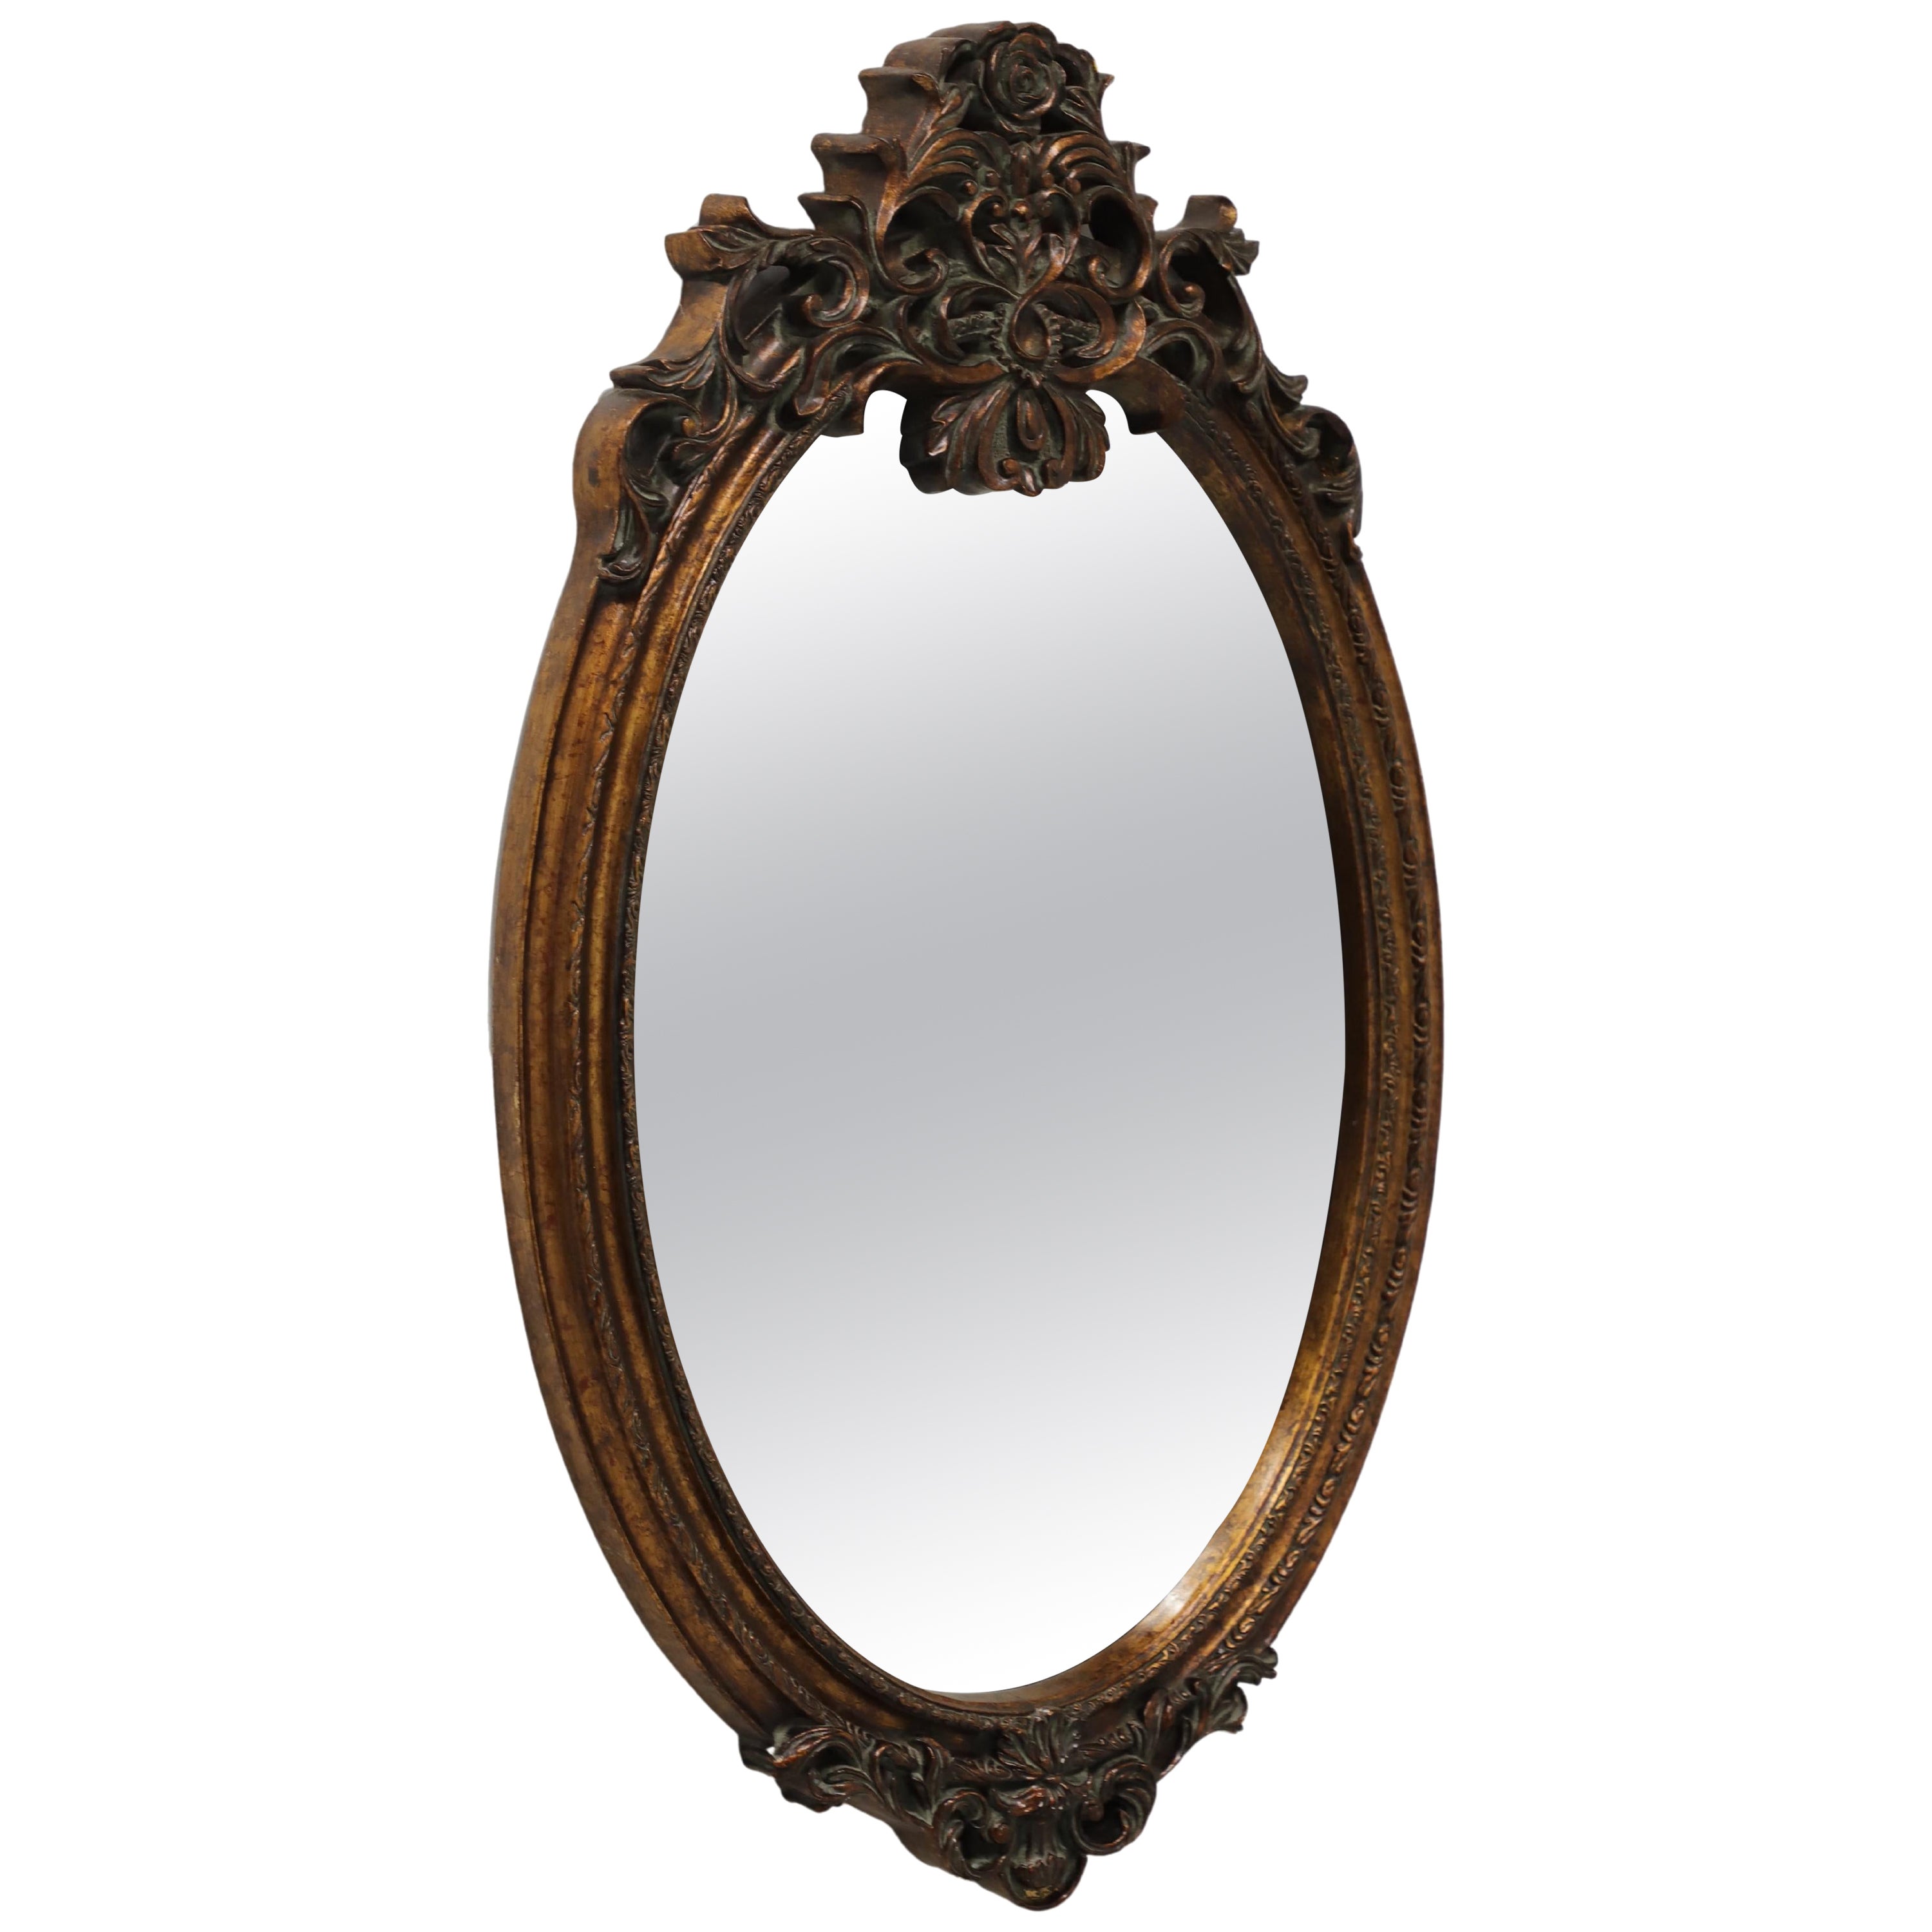 Early 21st Century Baroque Style Wall Mirror